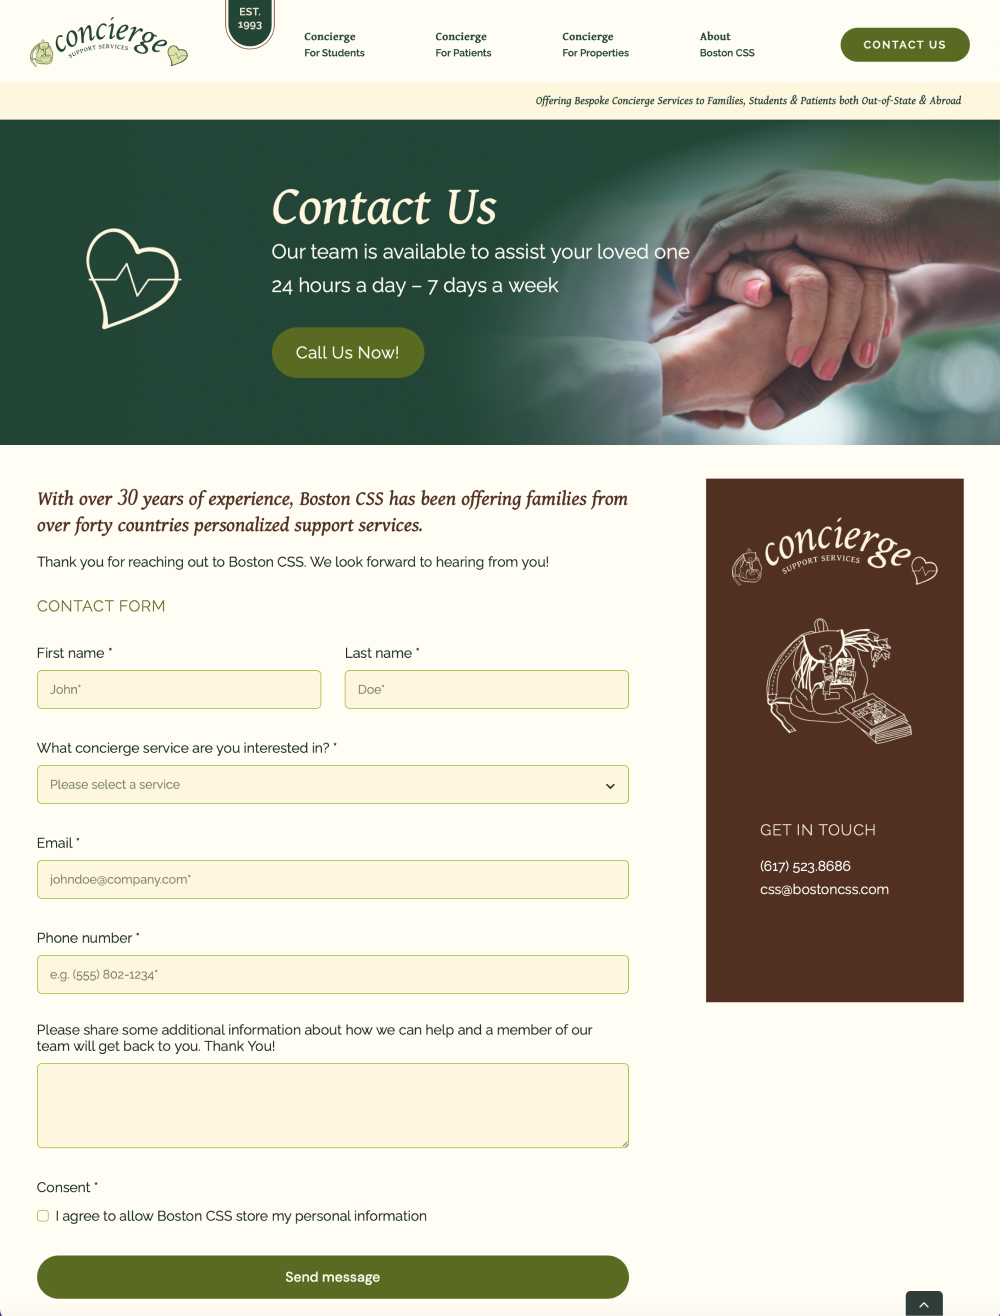 Boston Concierge Support Services Contact Form